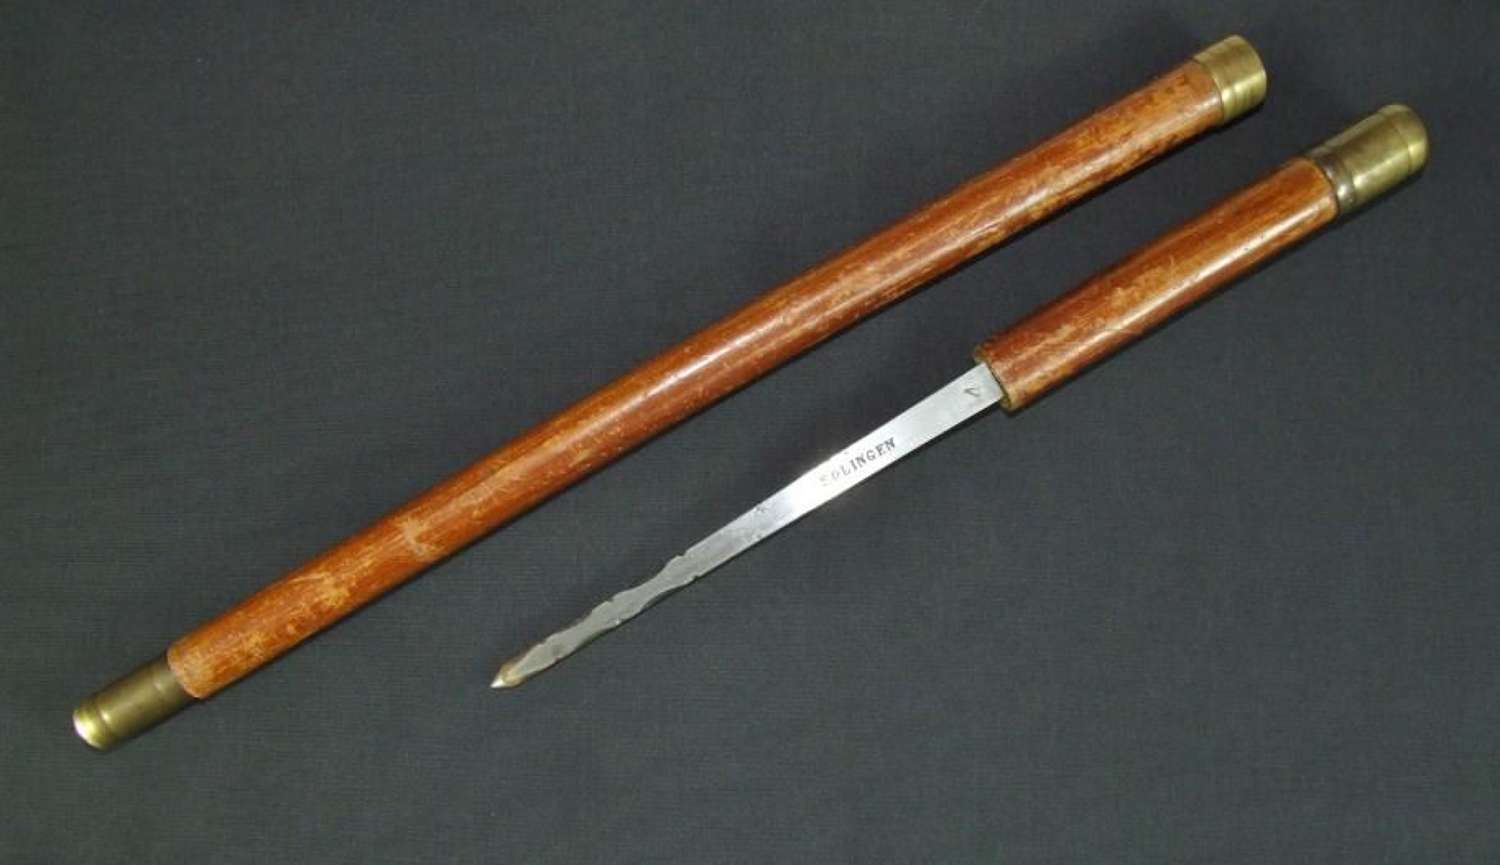 Imperial German Officer's Dagger Cane. Over 100 Years Old